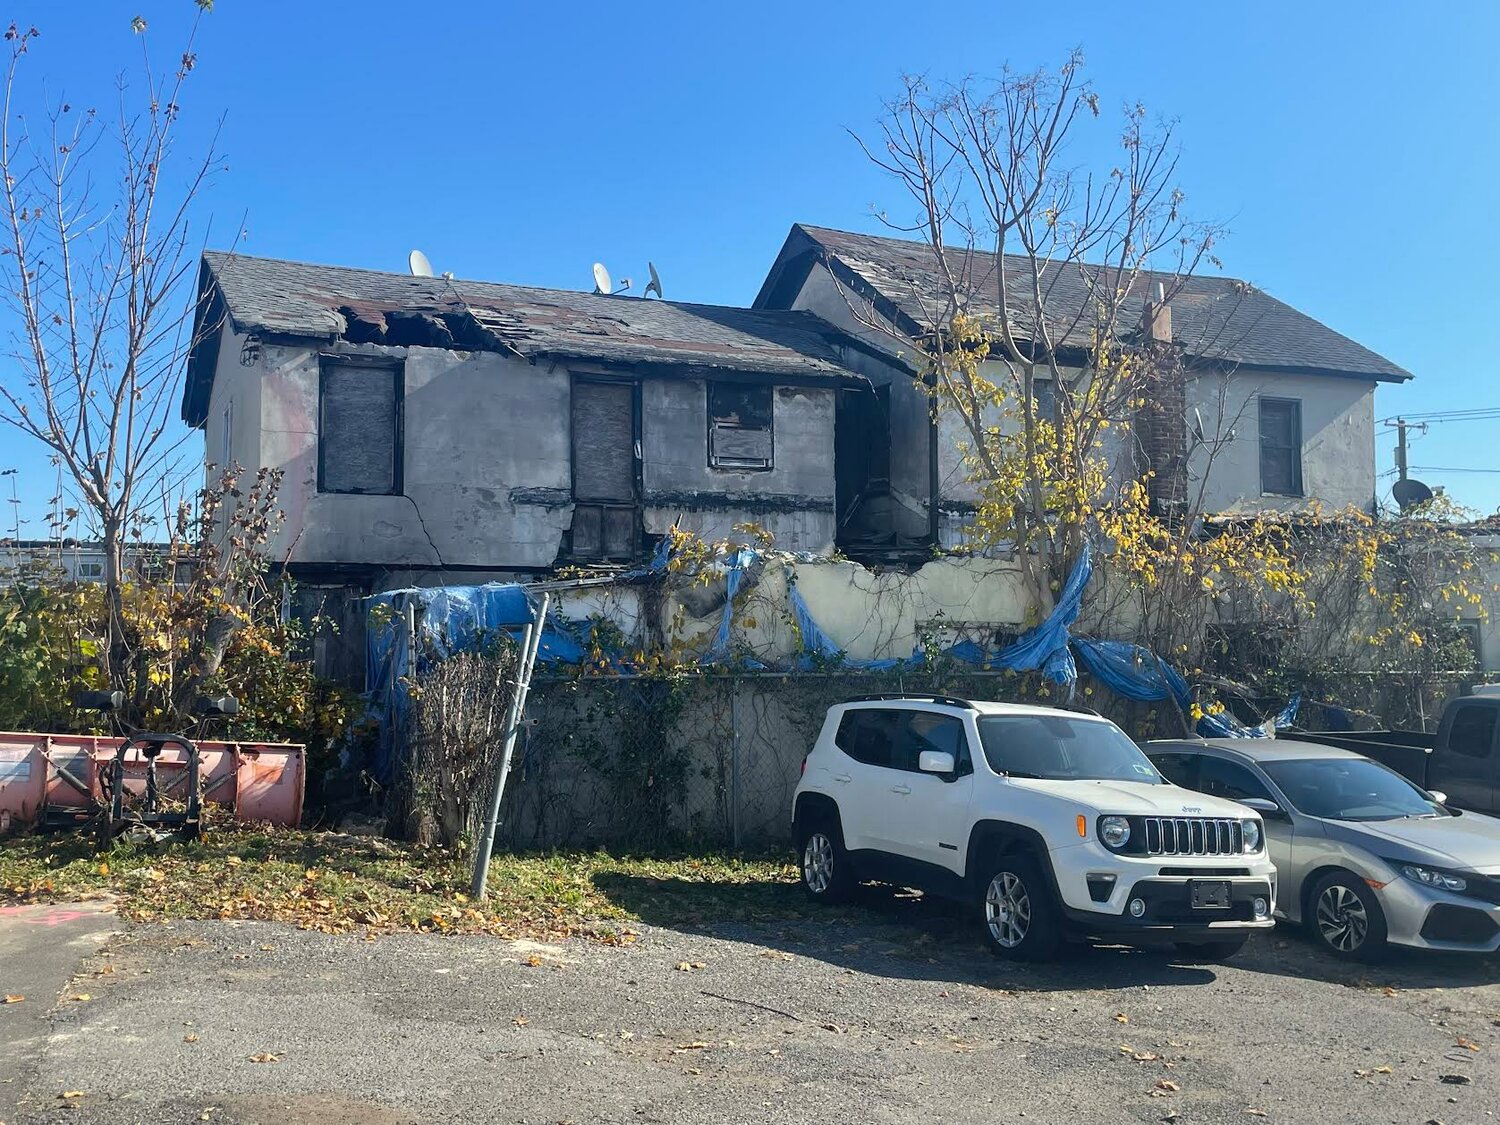 A view of the rear buildings that suffered from a fire.